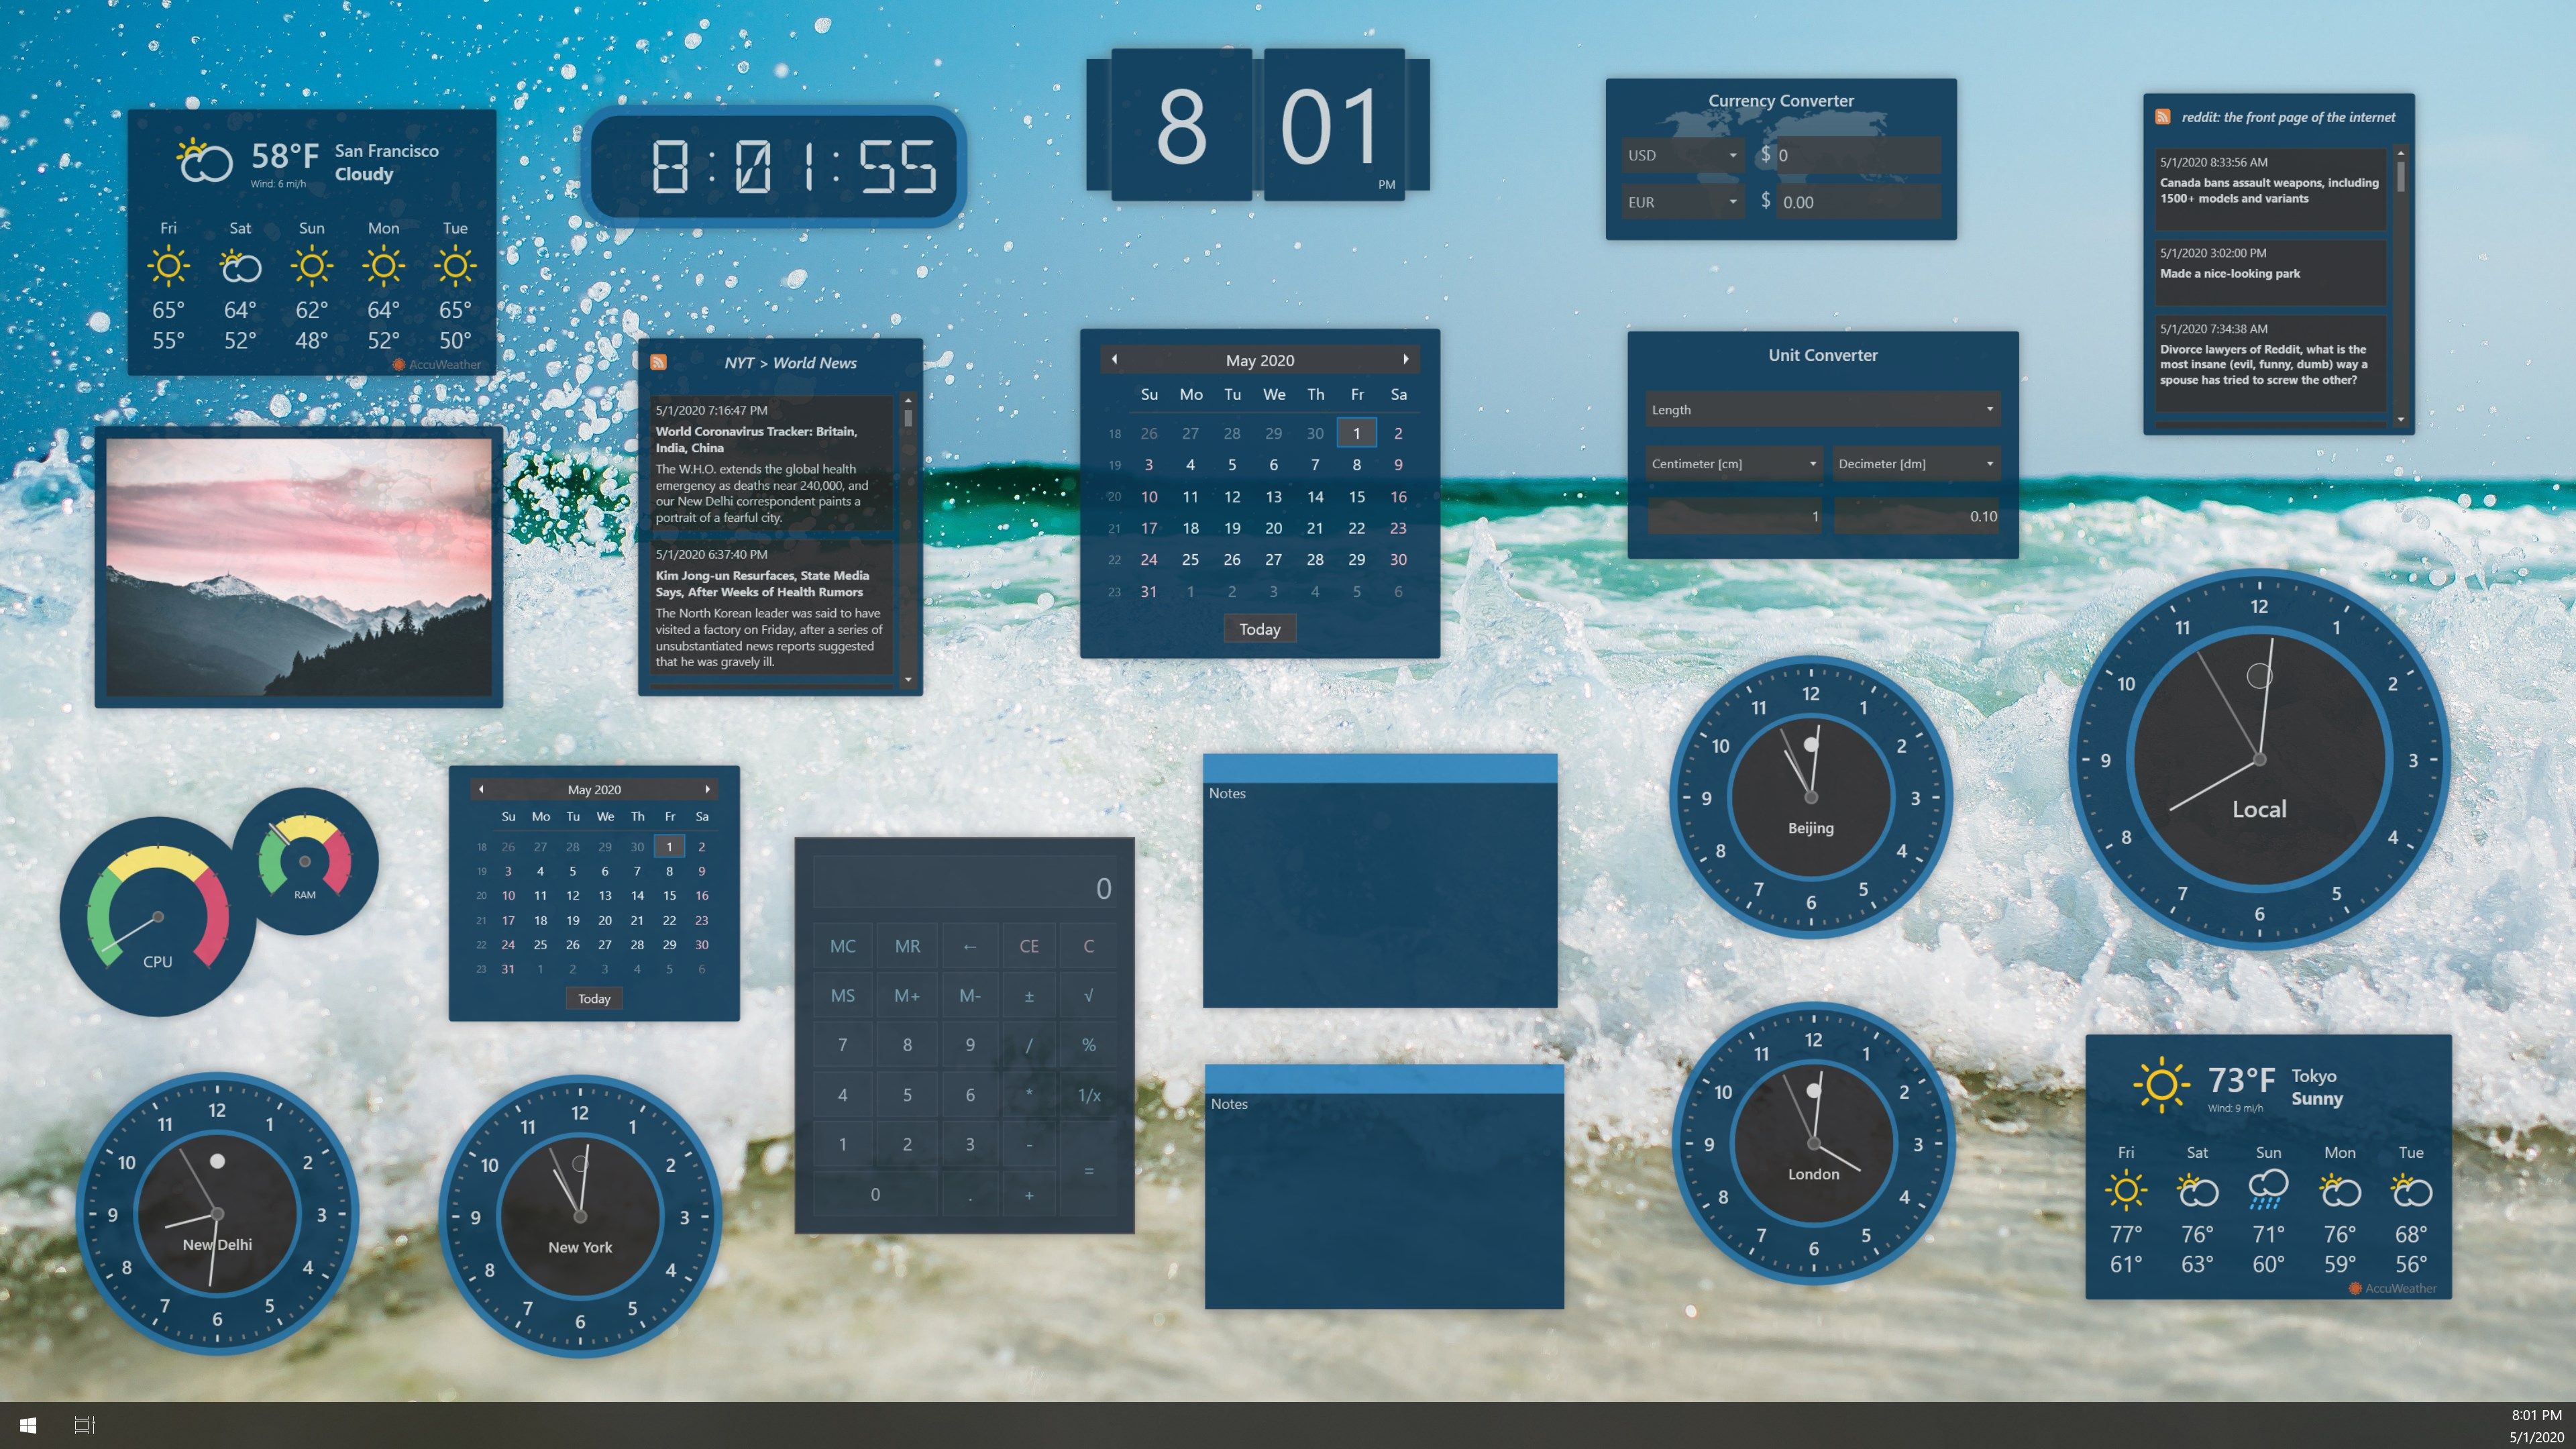 Dozens of beautiful widgets to choose from